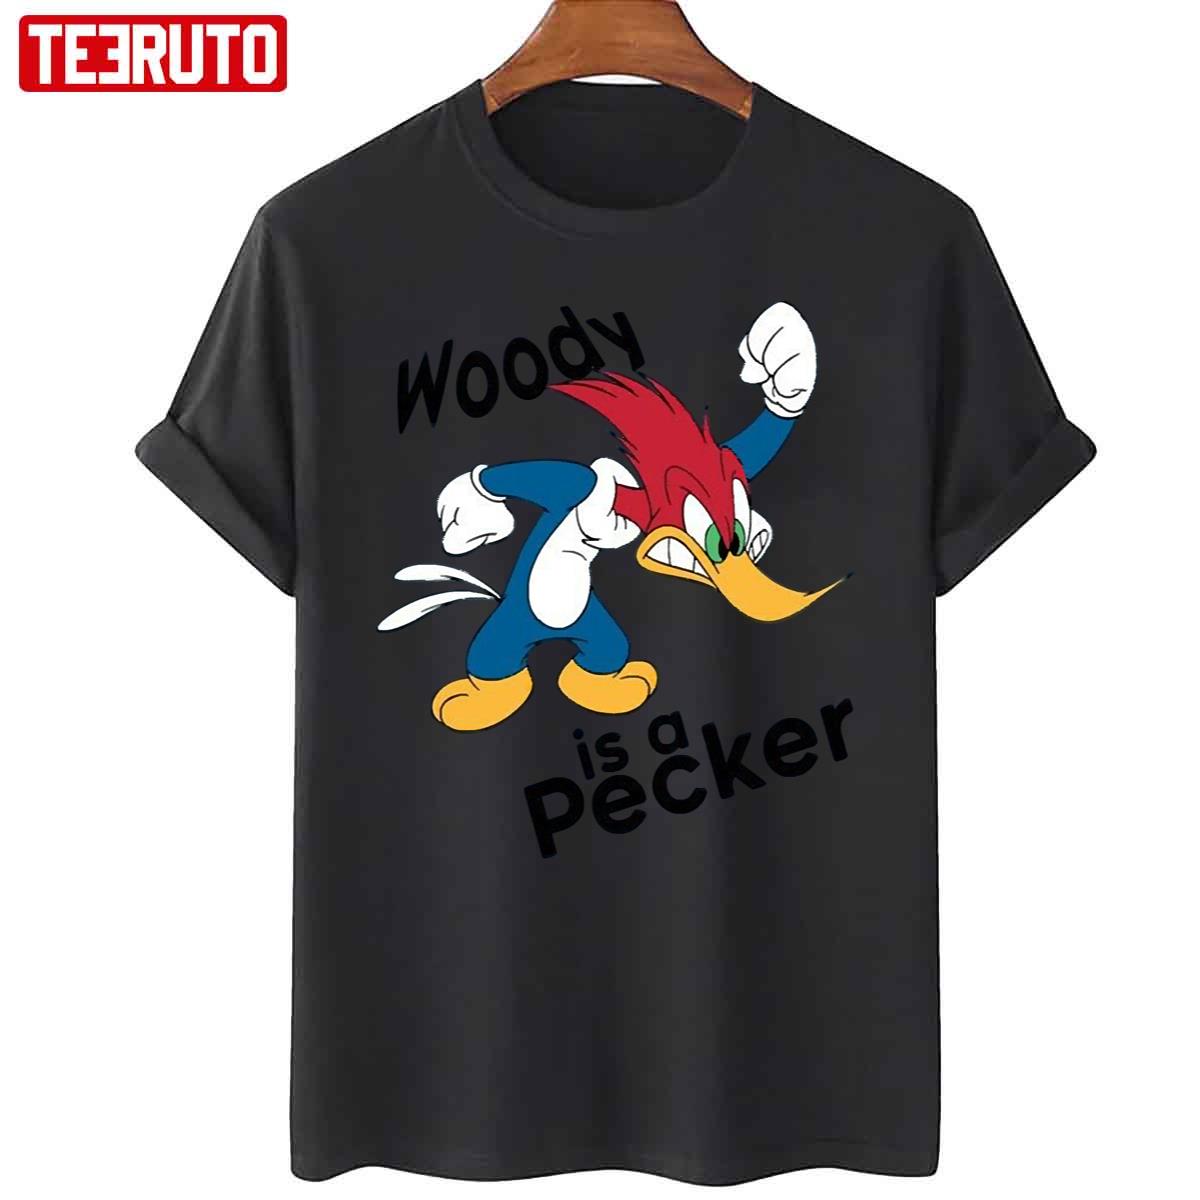 Angry Woody Is A Pecker Funny Cartoon Vintage Character Unisex T-Shirt